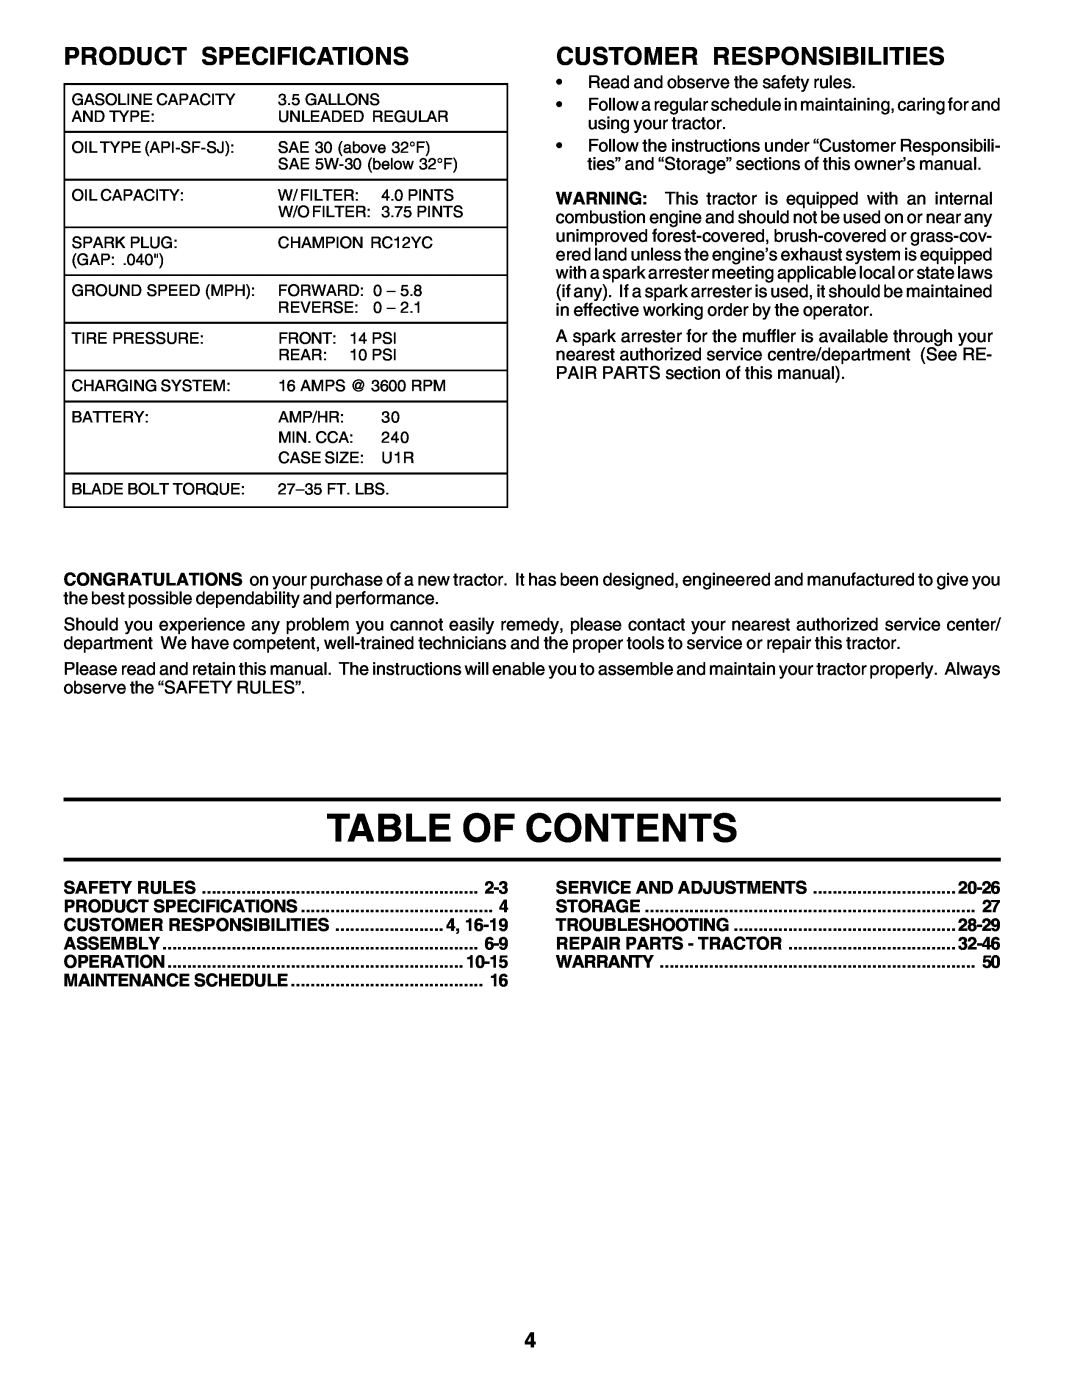 Poulan PRGT22H50B owner manual Table Of Contents, Product Specifications, Customer Responsibilities 